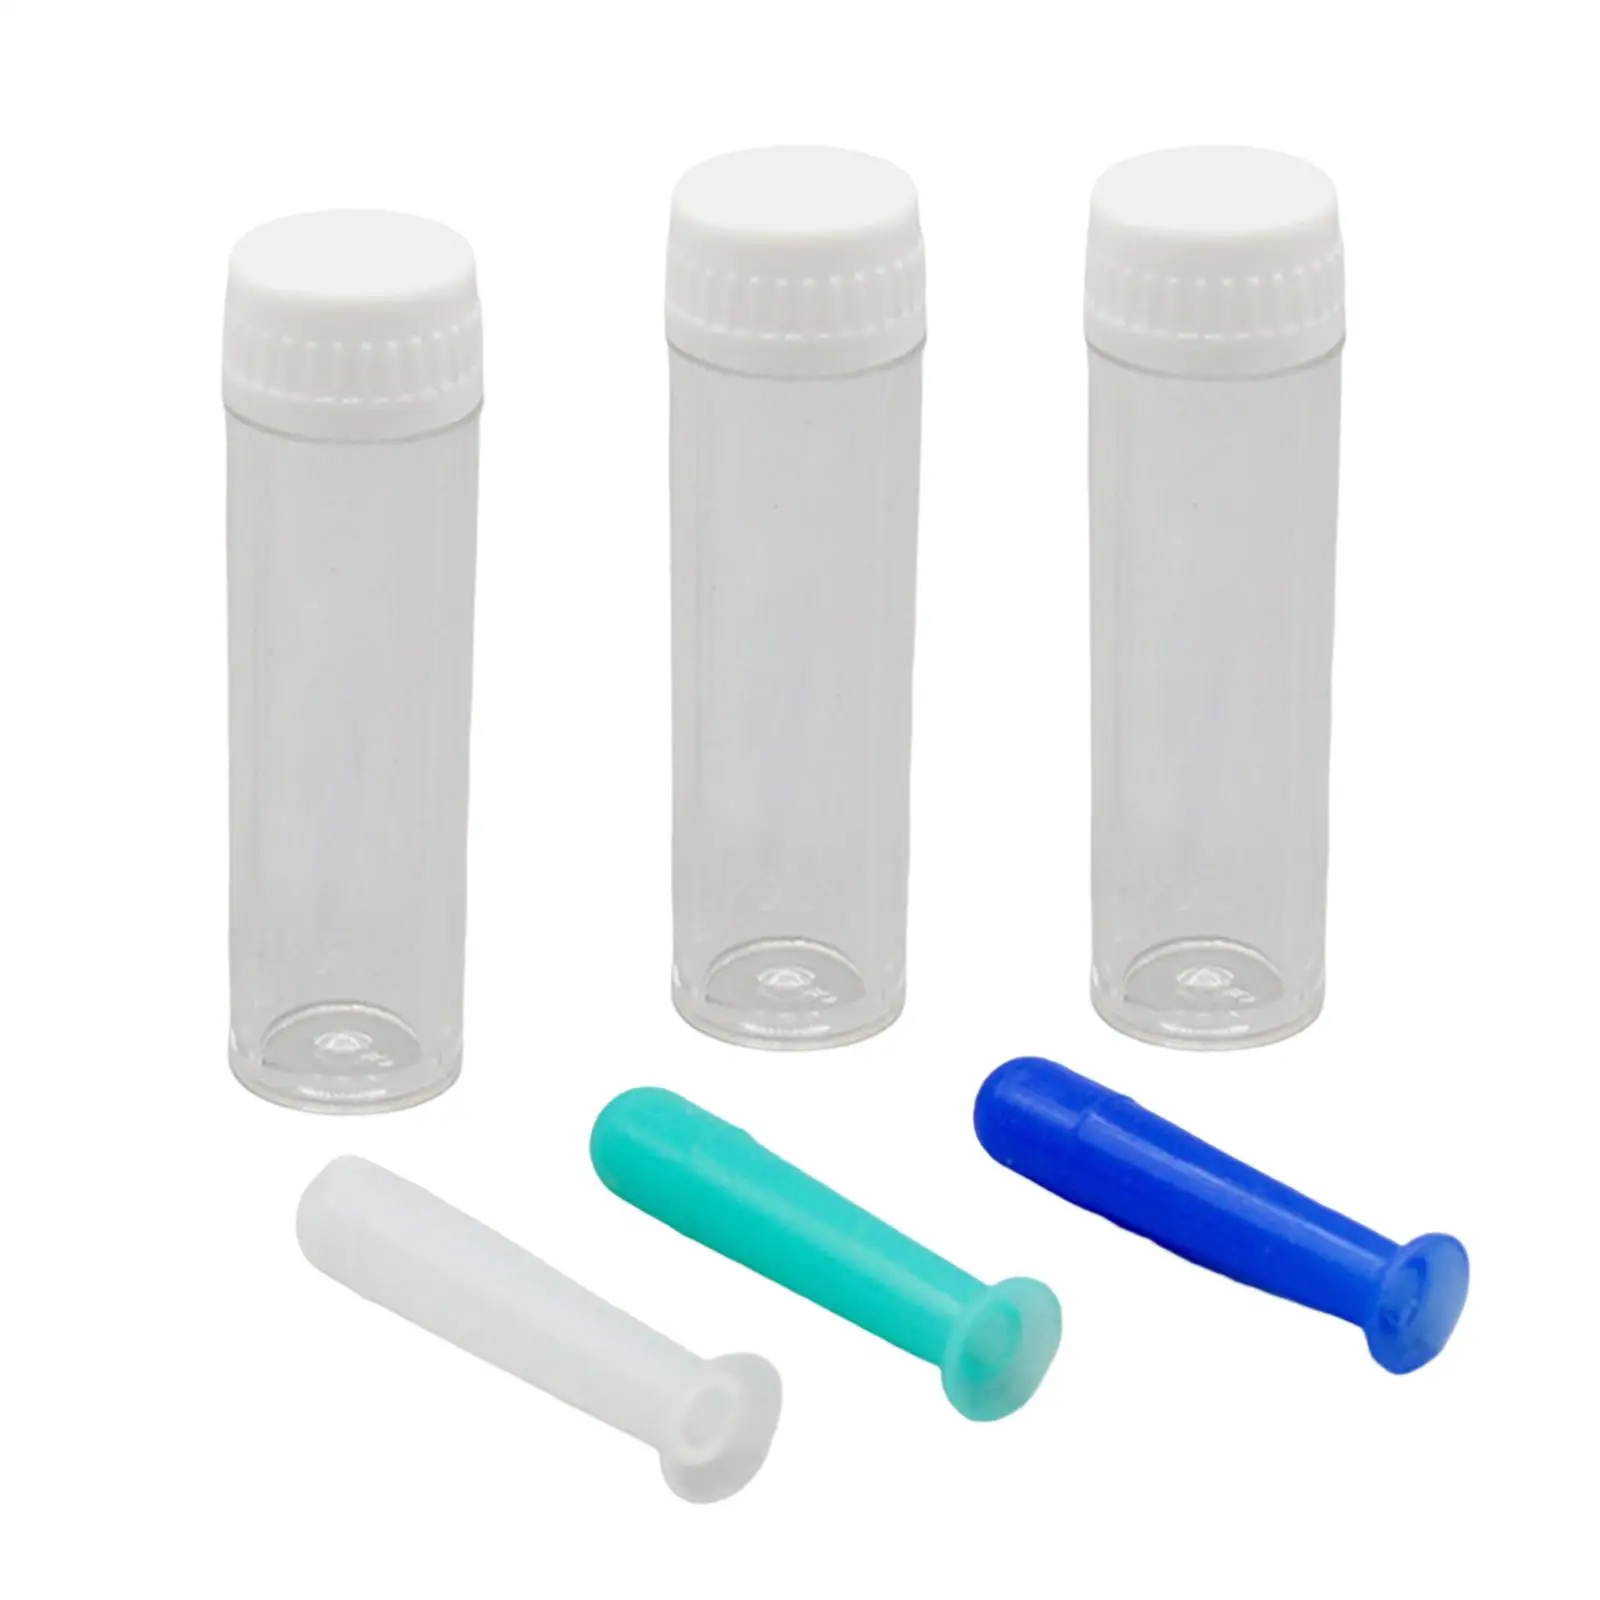 Soft Contacts Remover Applicator with Storage Bottle Portable Lightweight Durable Extractor Inserting Stick for Rgp Lenses